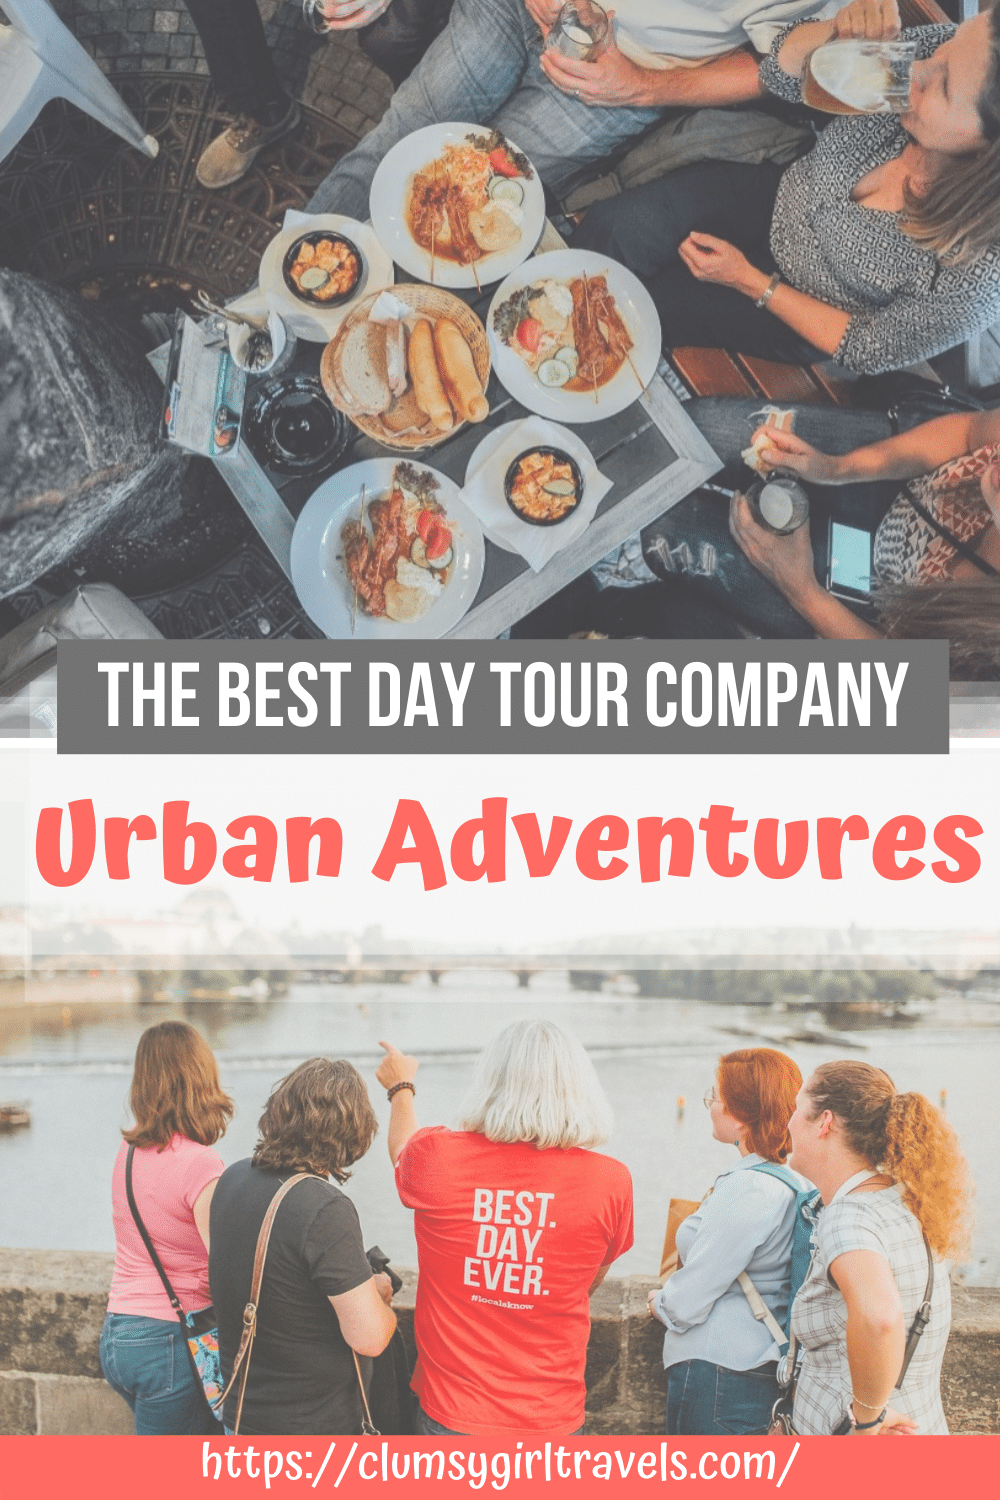 Urban Adventures is an amazing tour company with tours all over the world. They show you a unique and different aspect of a city. Book you tour today! #urbanadventures #tourcompany